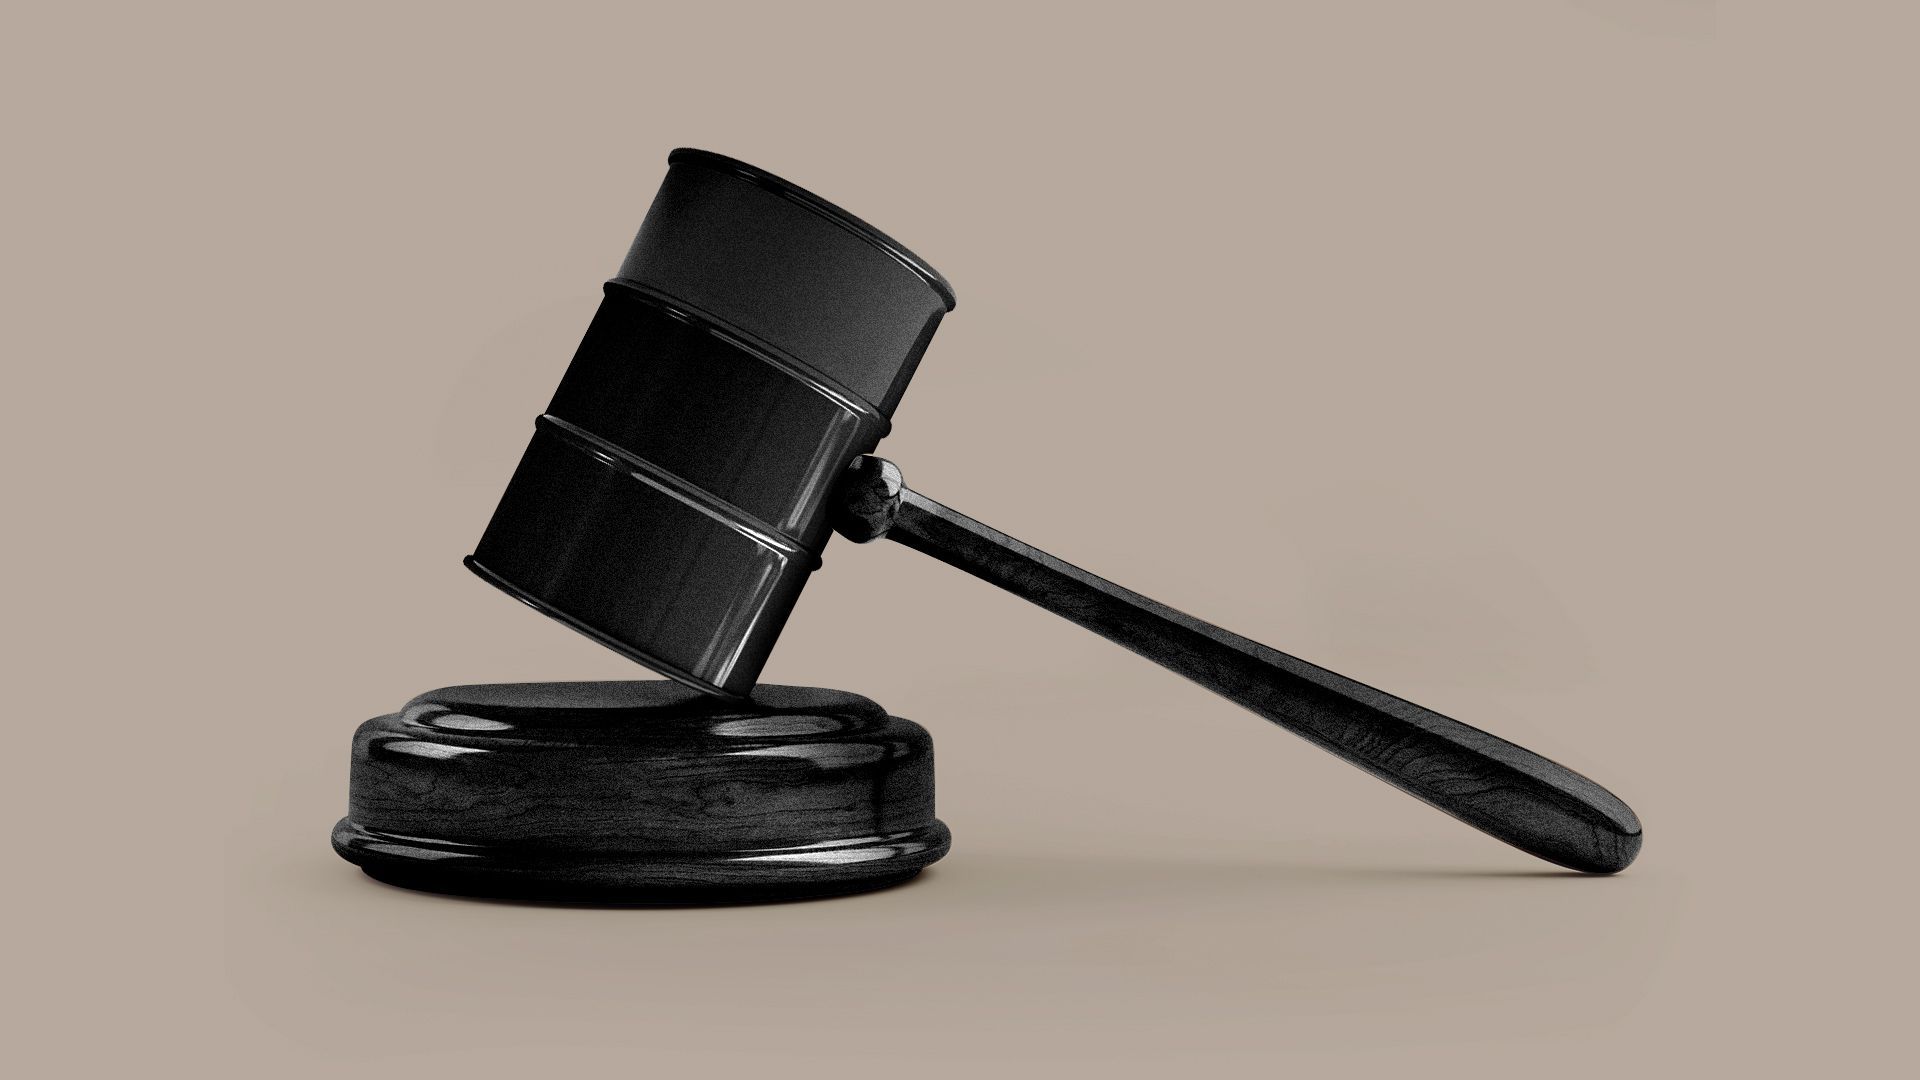 Illustration of a gavel with an oil barrel as the head.